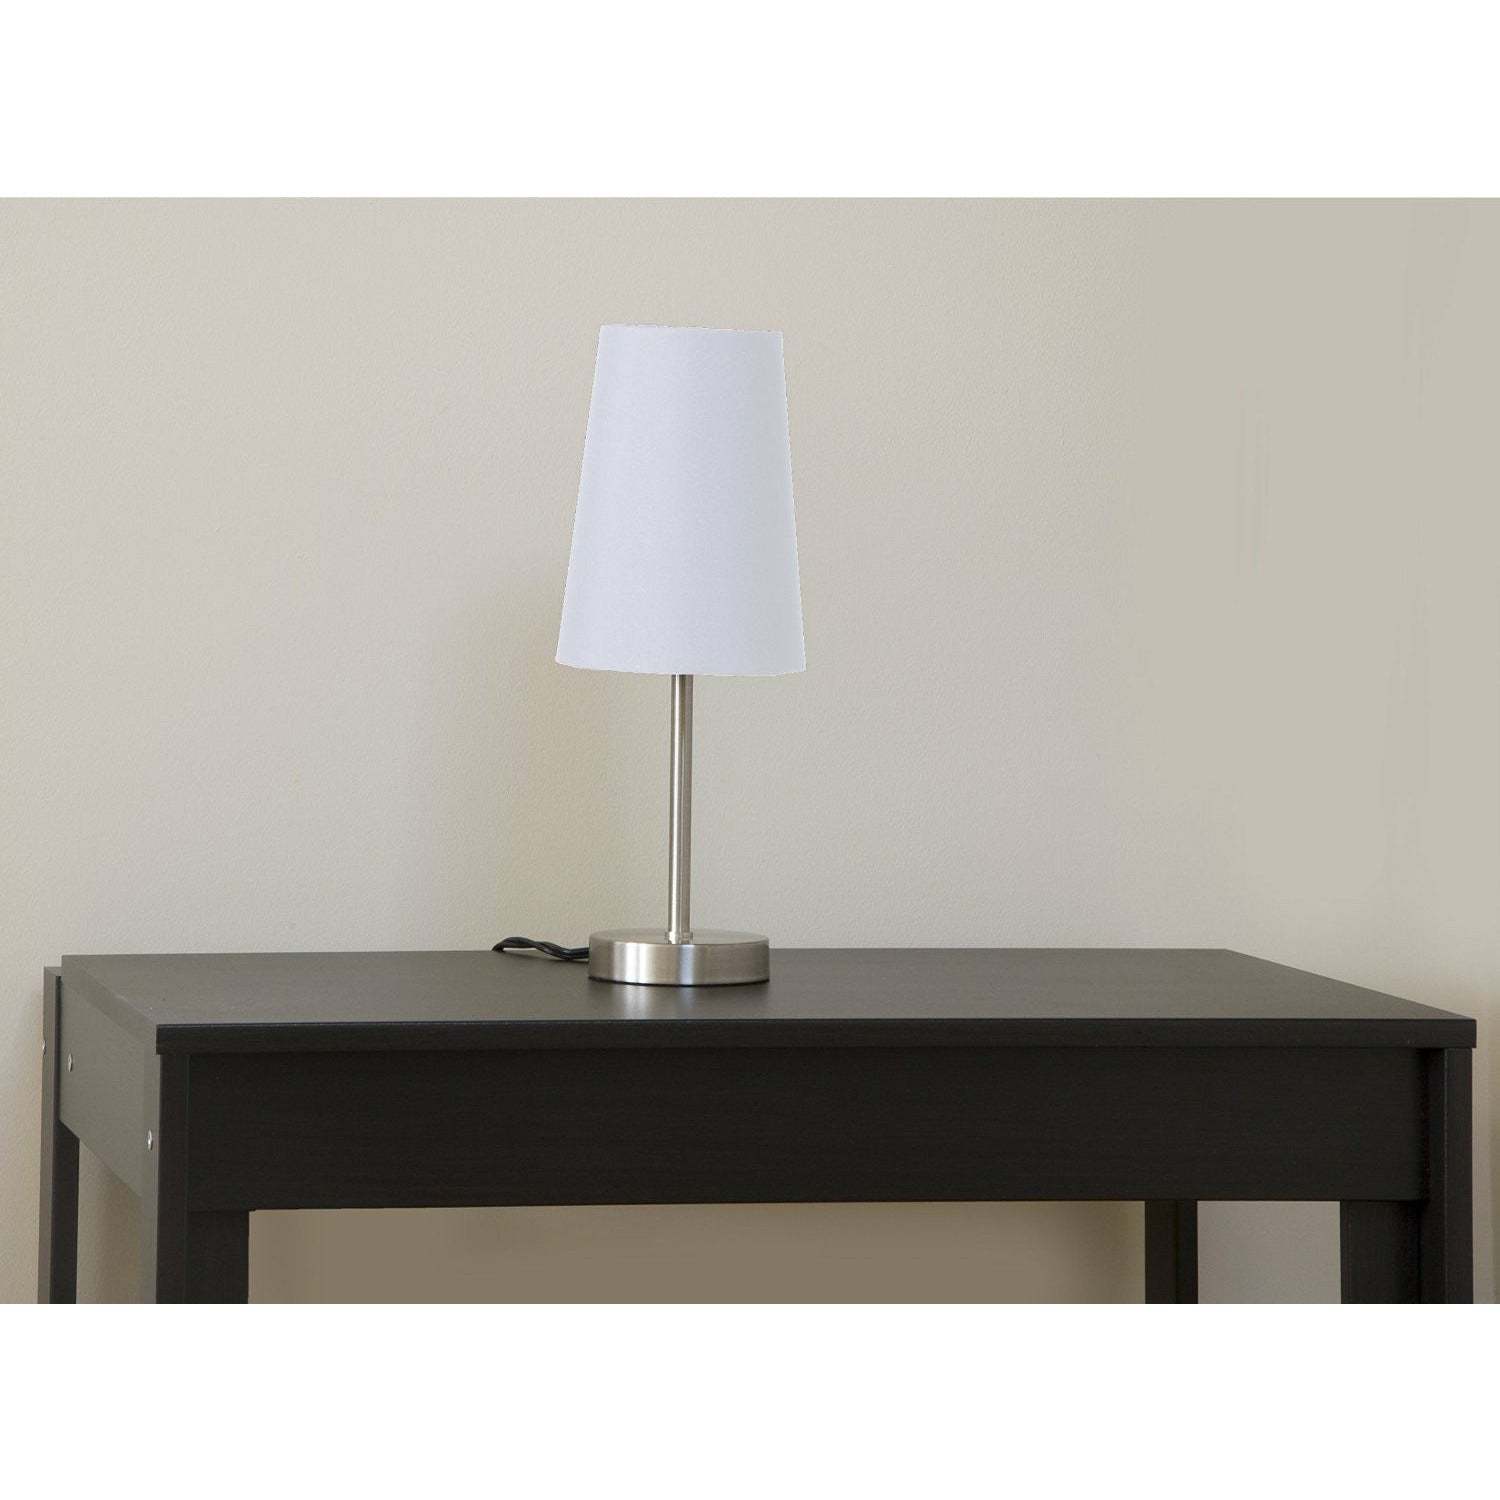 LightAccents Brushed Nickel Table Lamp with Fabric Shade - LightAccents.com
 - 5